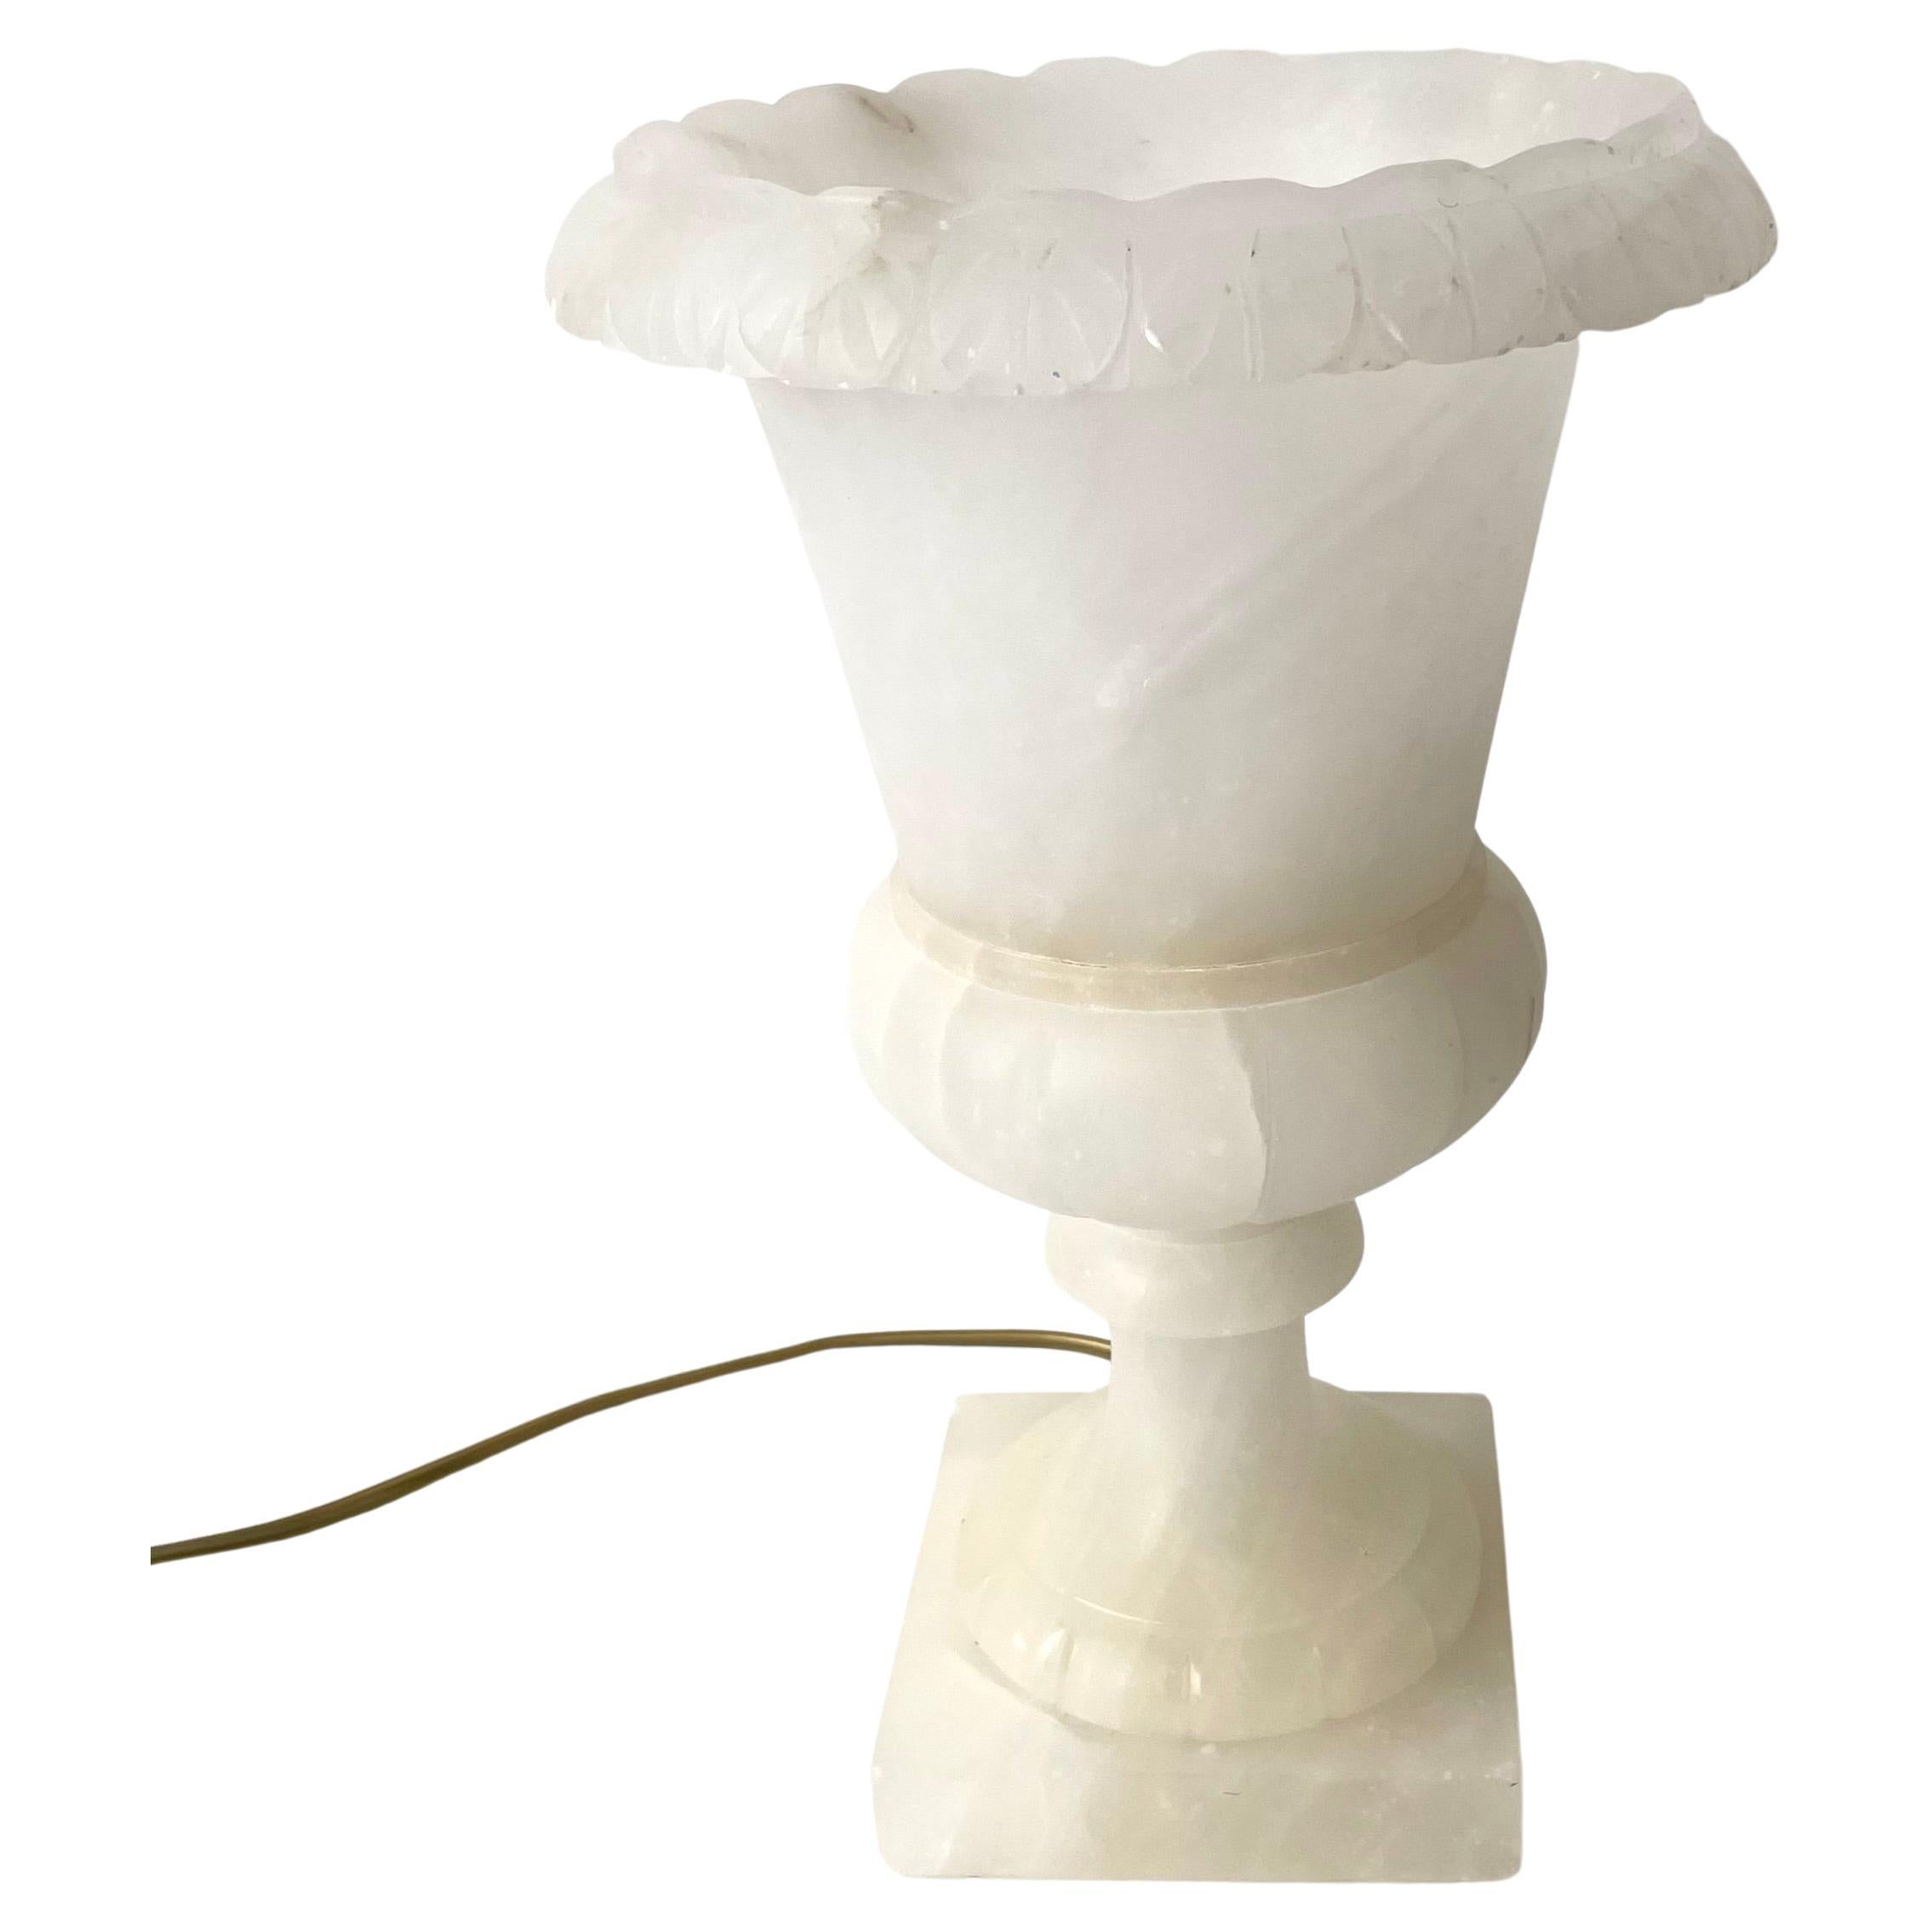 Elegant Alabaster Table Lamp in the Shape of a Classical Urn, Early 20th Century